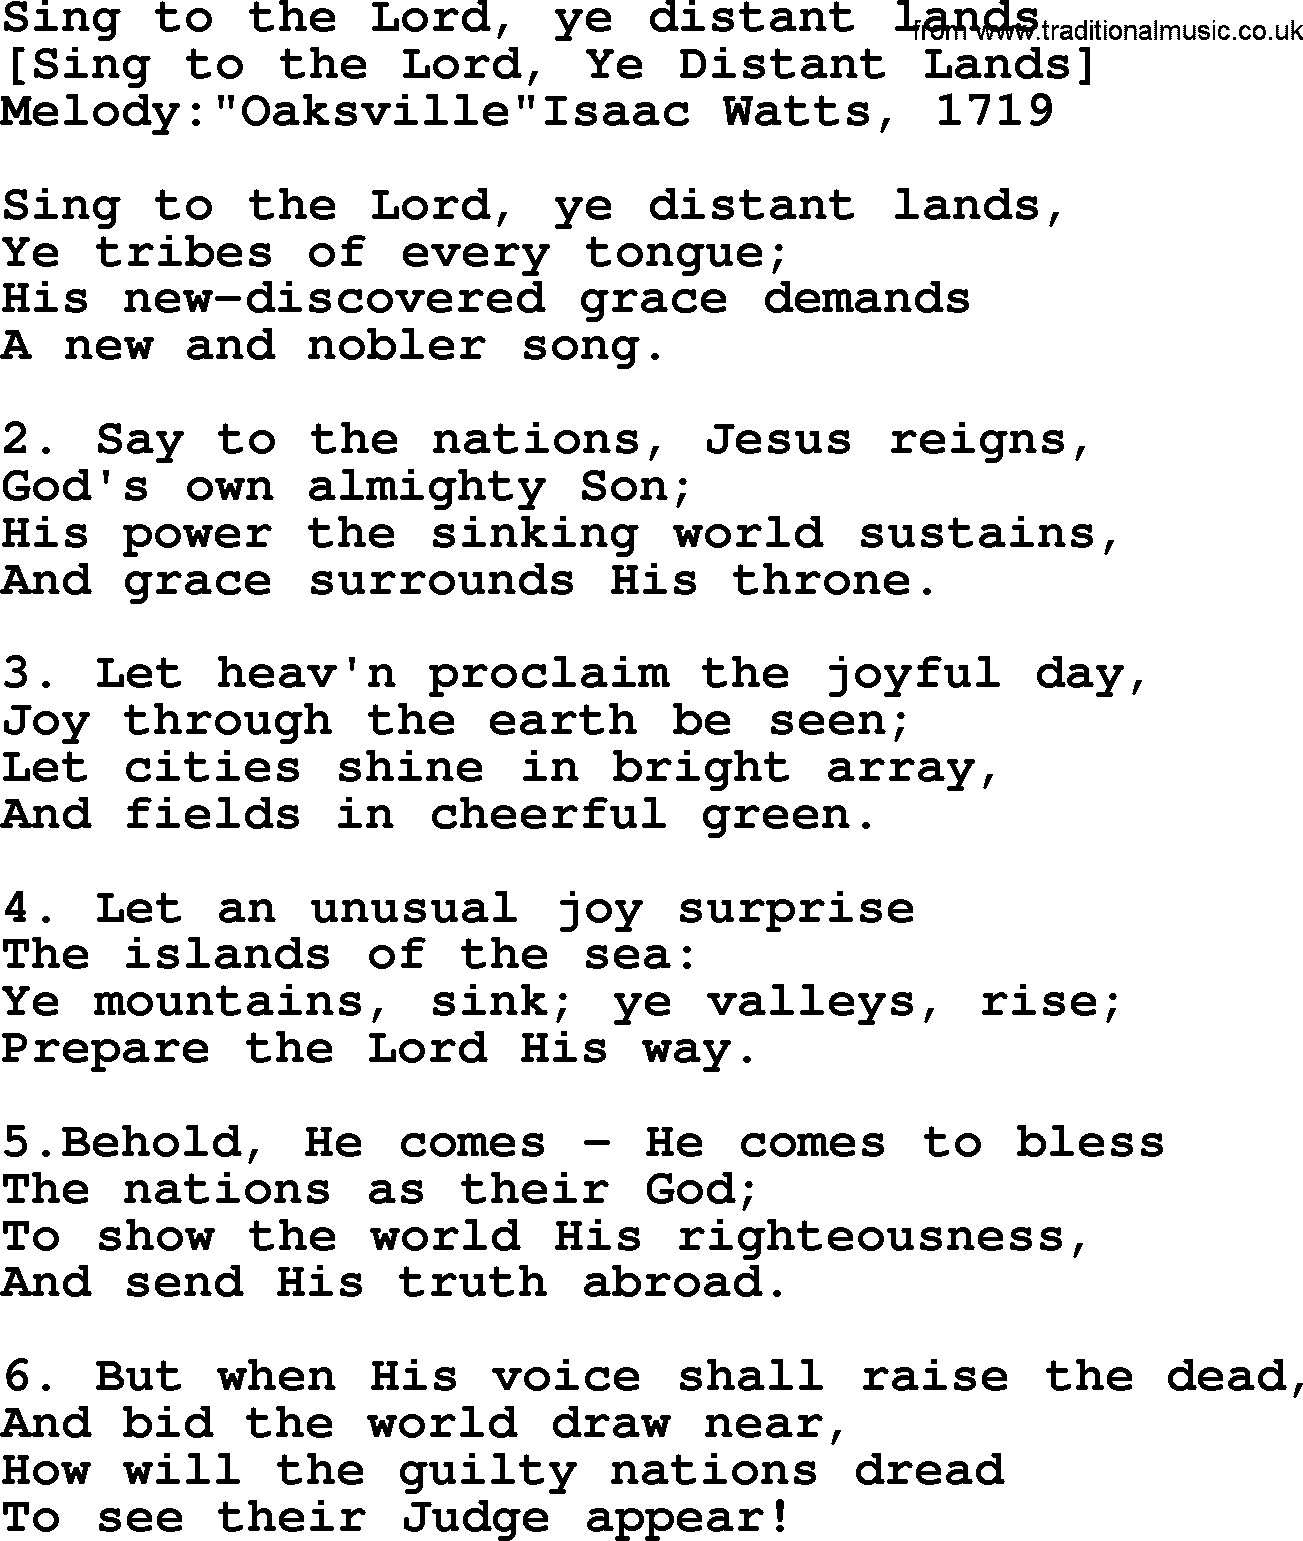 Old English Song: Sing To The Lord, Ye Distant Lands lyrics